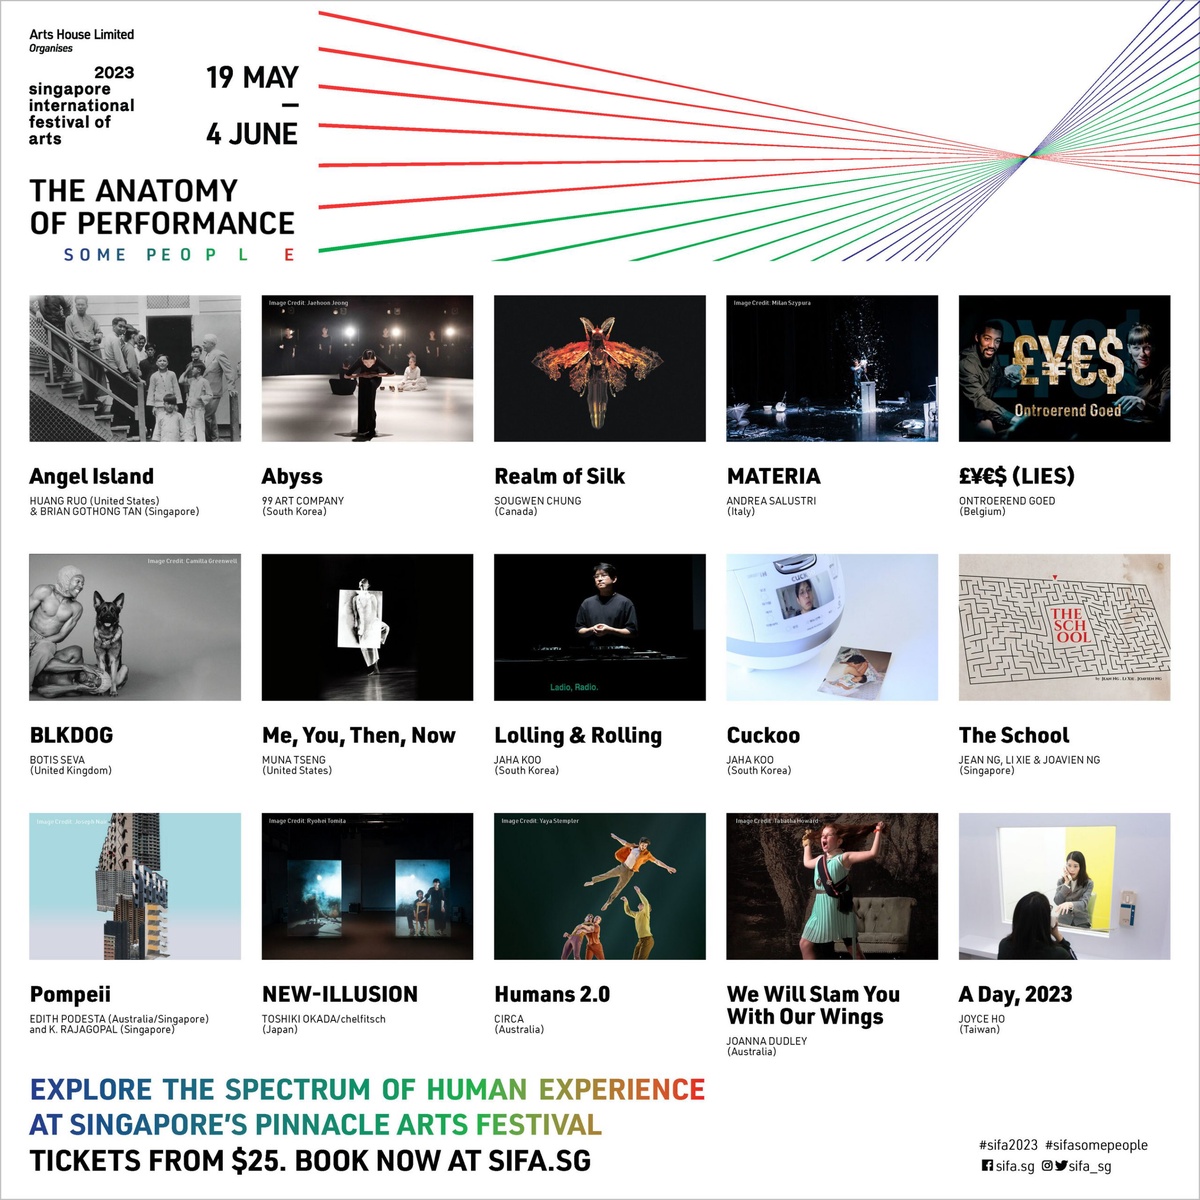 Singapore International Festival of Arts 2023 Explores the Spectrum of the Human Experience